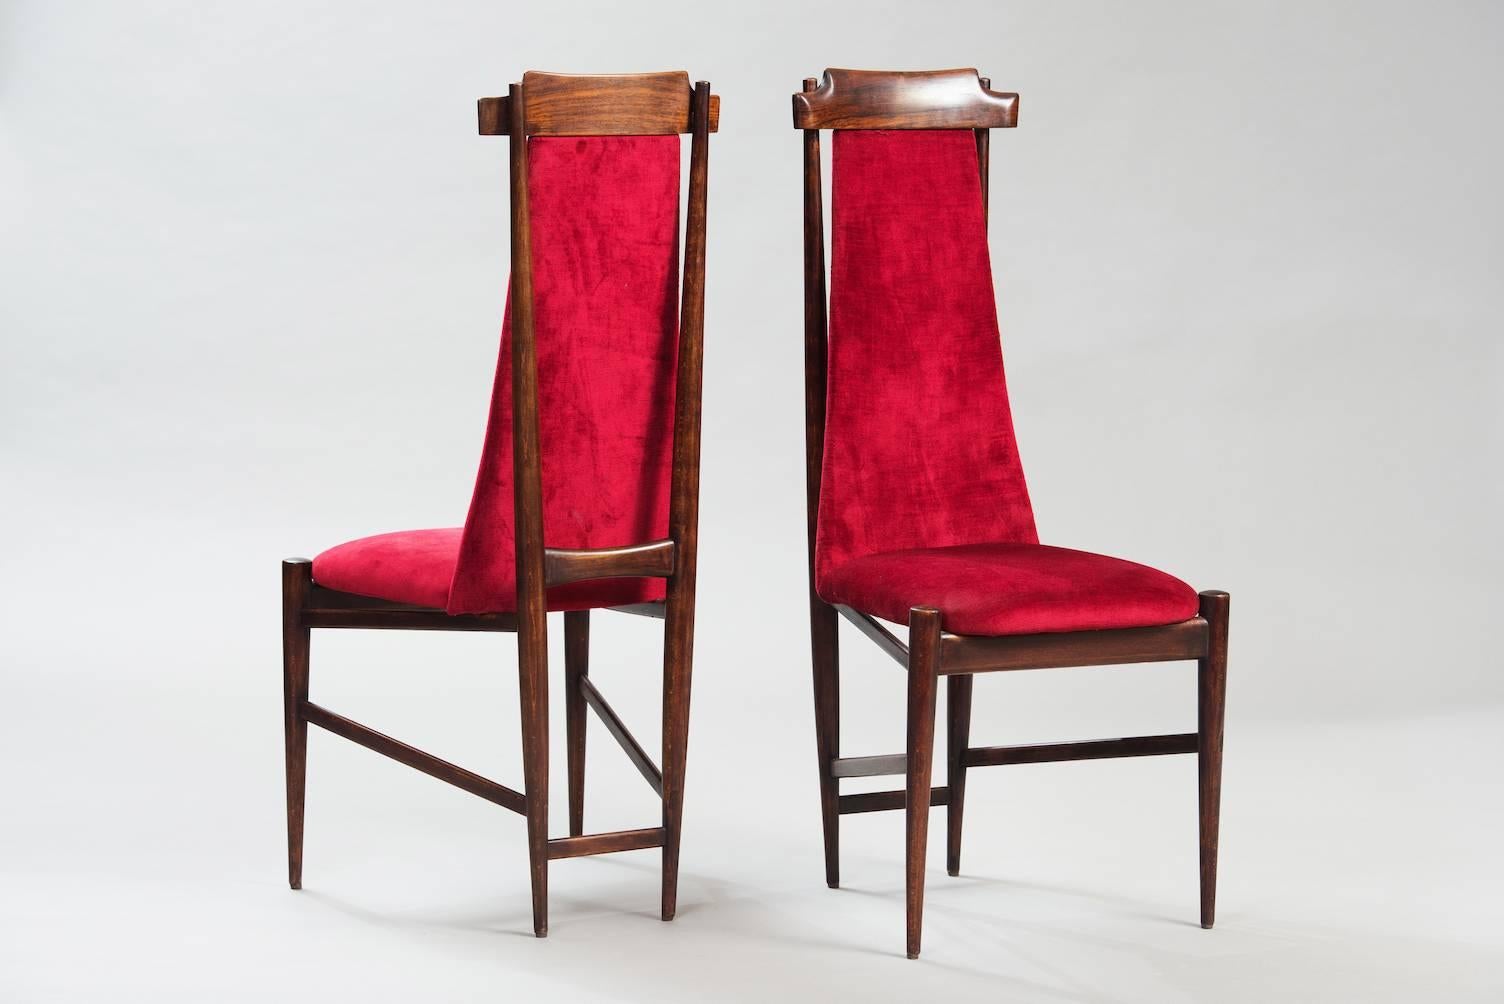 Set of six high back beech dining chairs upholstered in red velvet in the style of Franco Albini.
Price fully restored: 5250€
The price shown is in the original condition.
We have our own workshop and we can restore these items, including